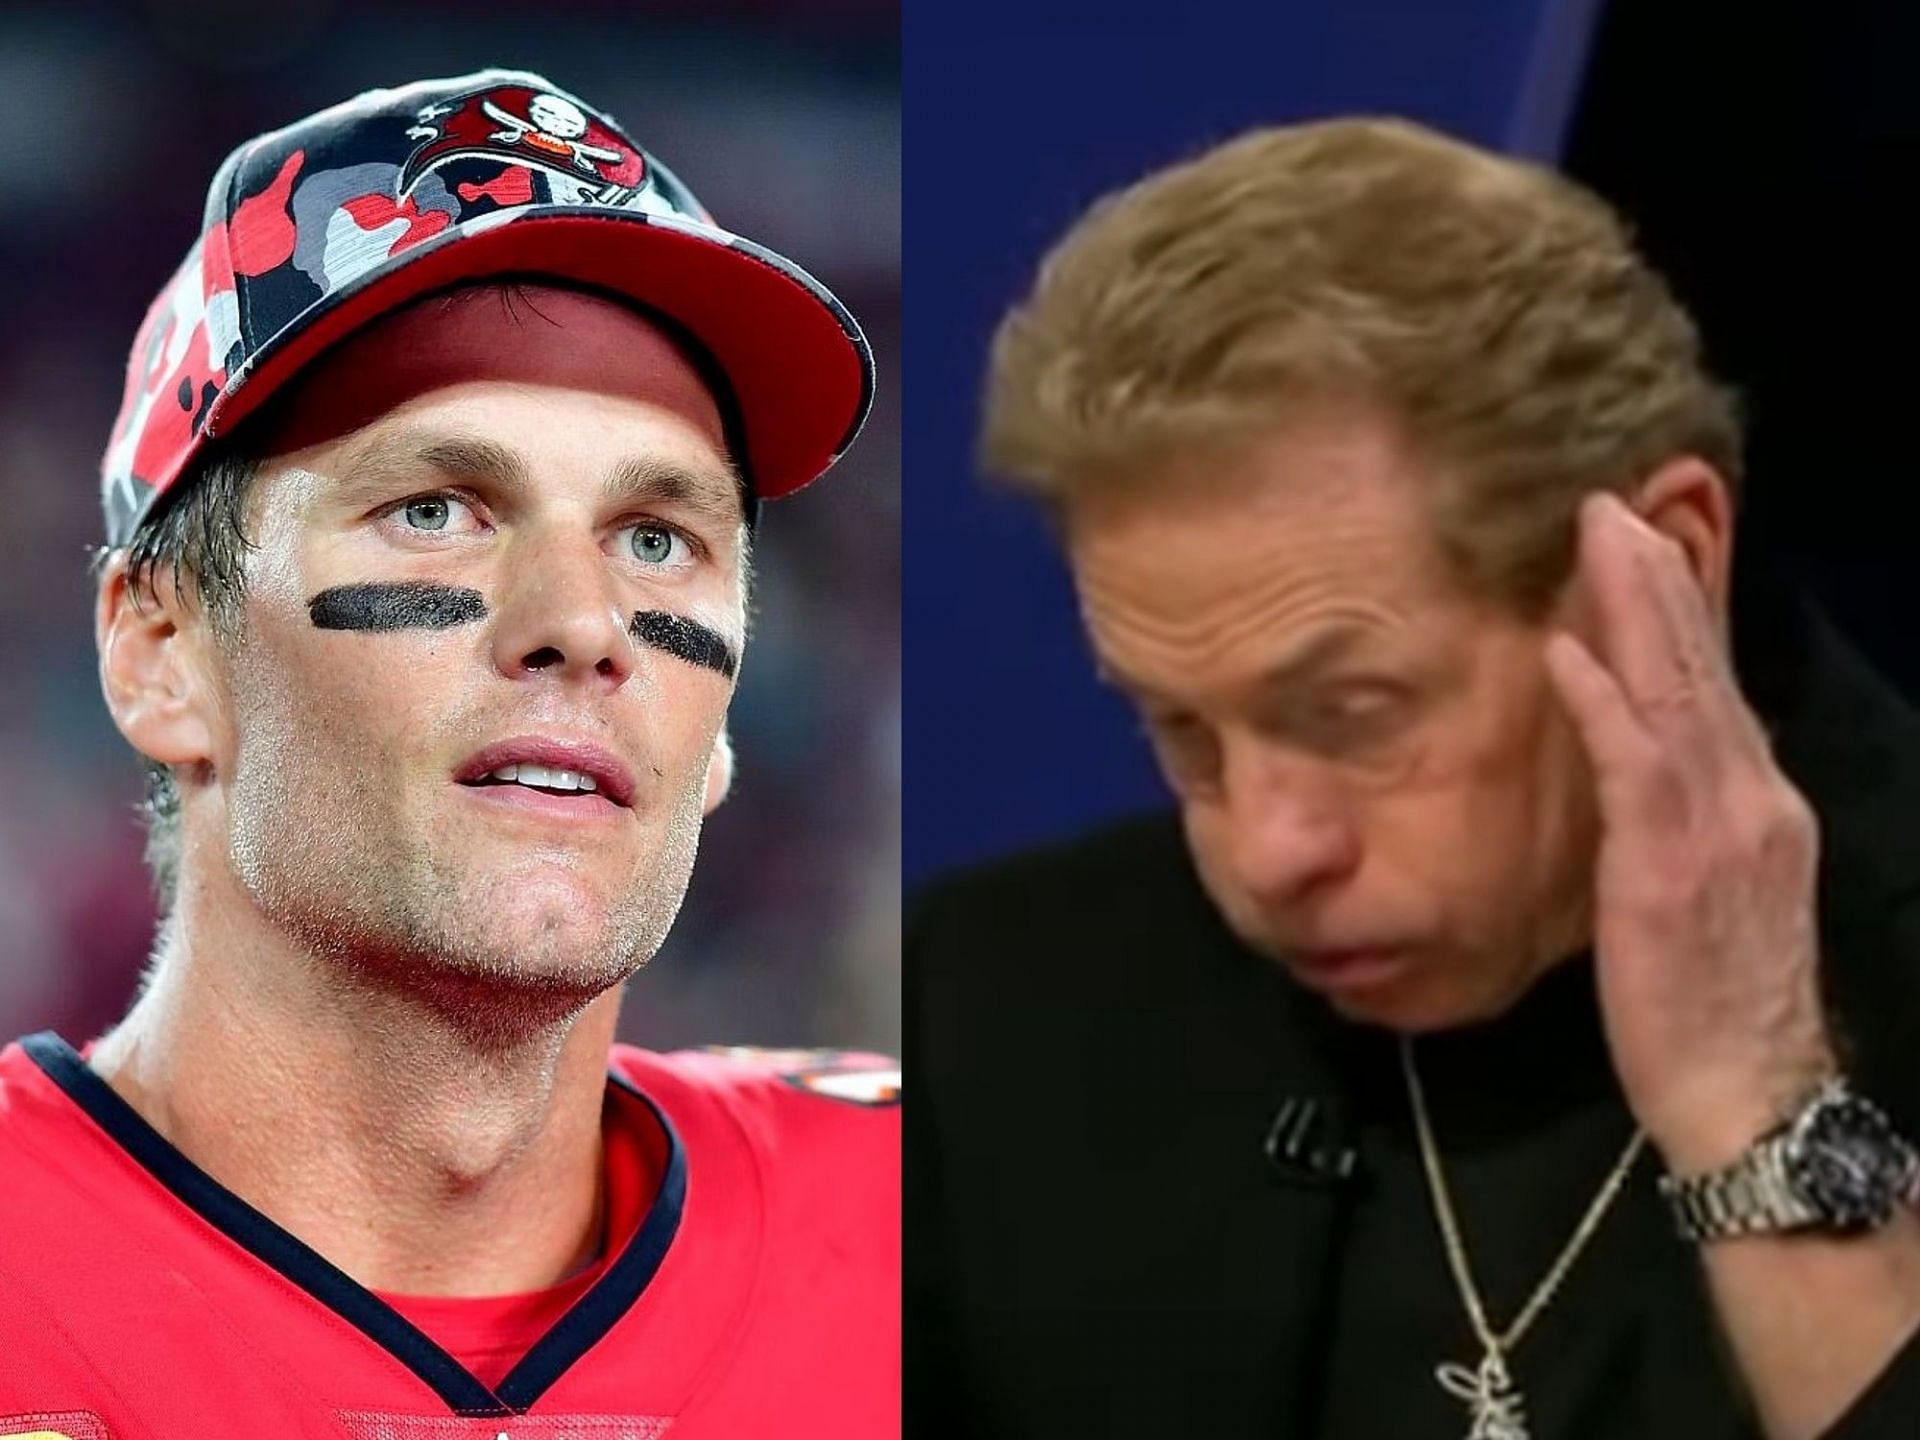 Tom Brady gets blind endorsement from Skip Bayless - Courtesy of Undisputed